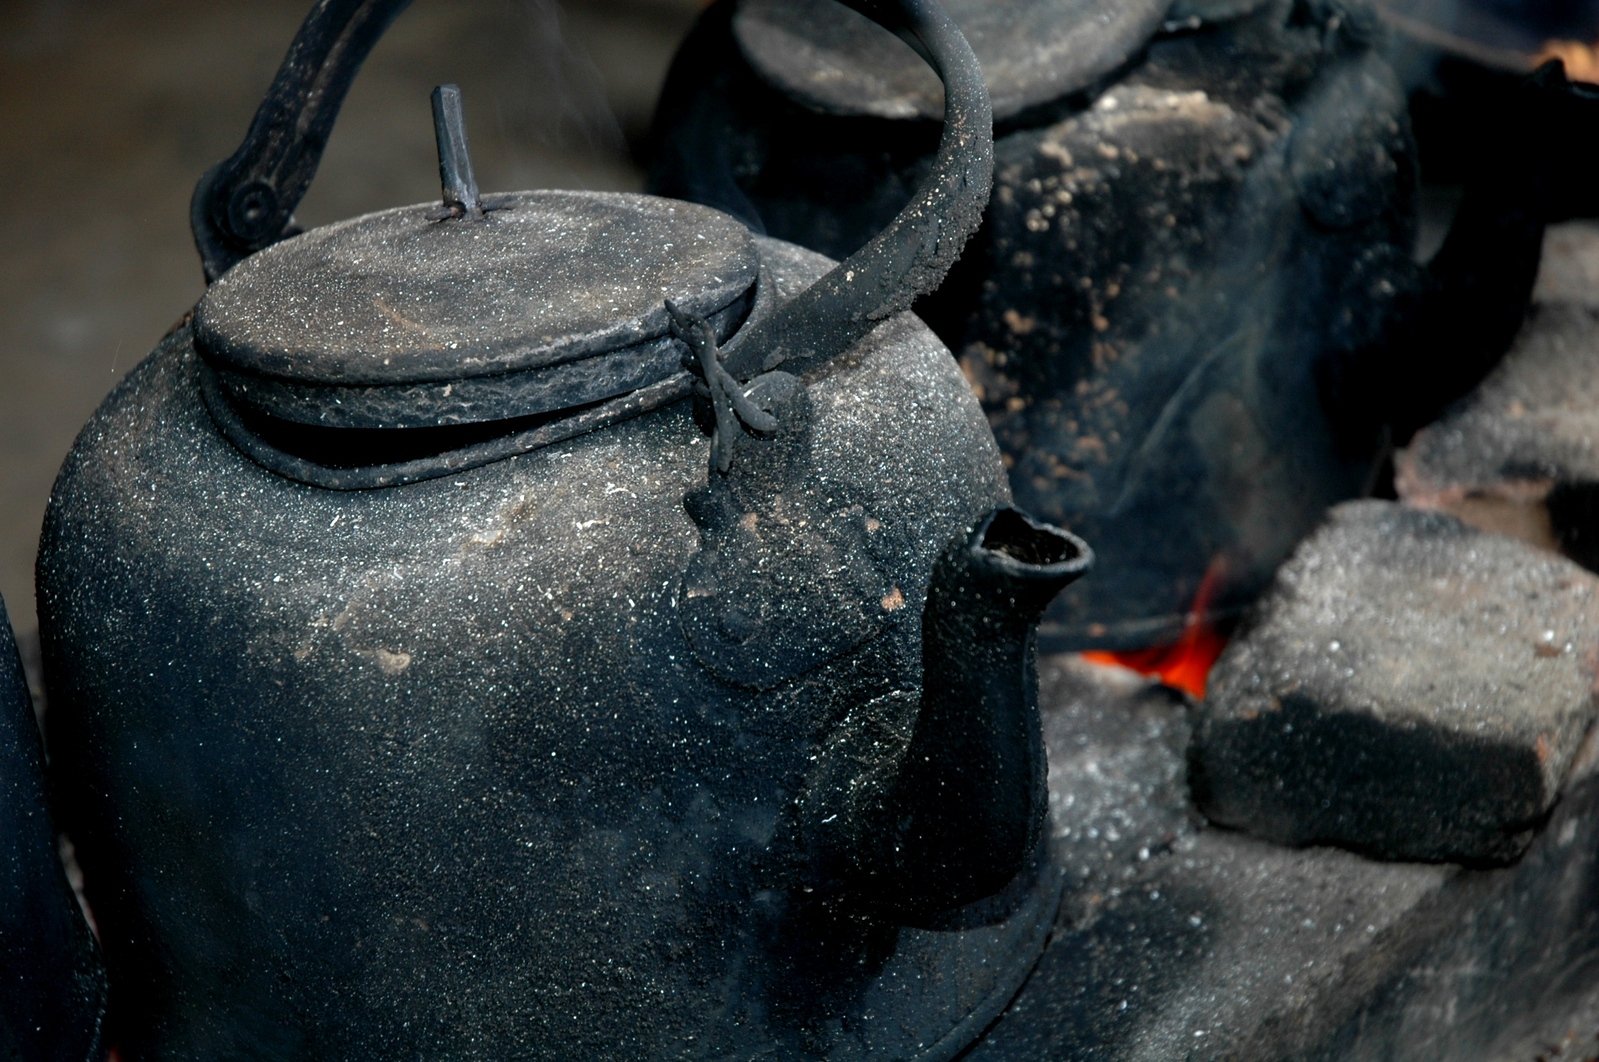 old black kettles and tea kettles with flames coming out of them